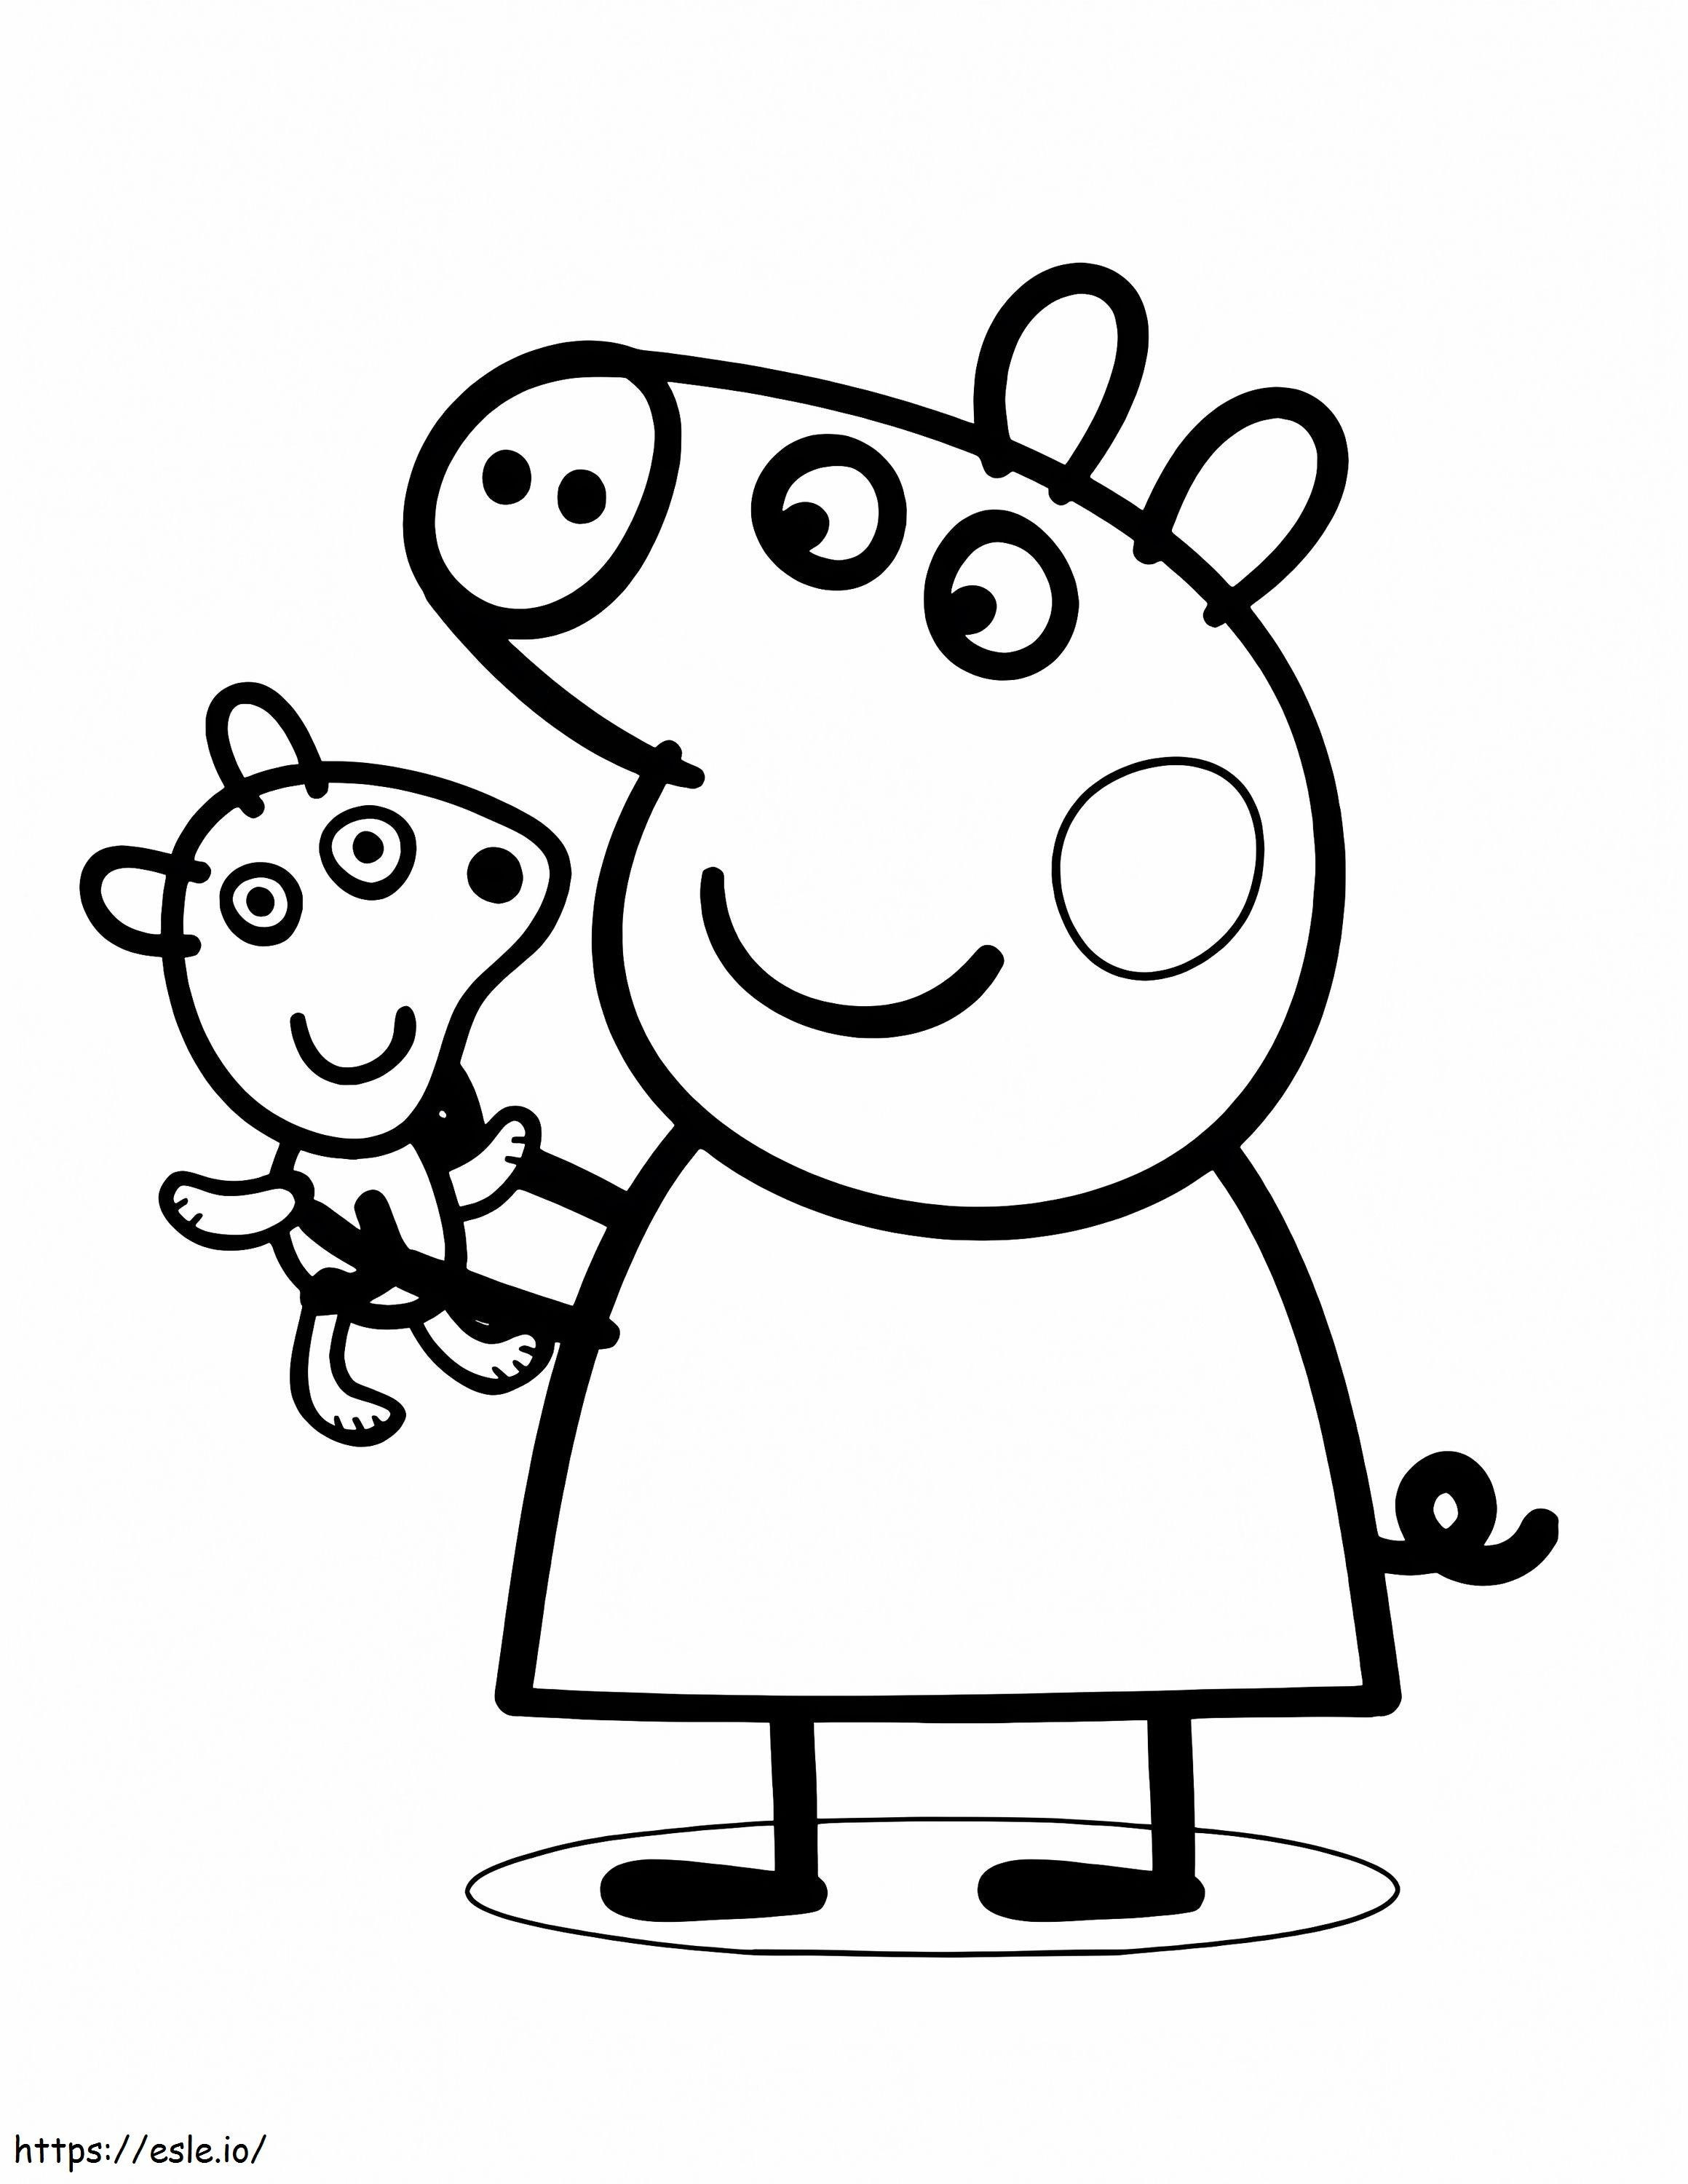 1582685973 Peppa Pig Pictures To Colour Central Image coloring page